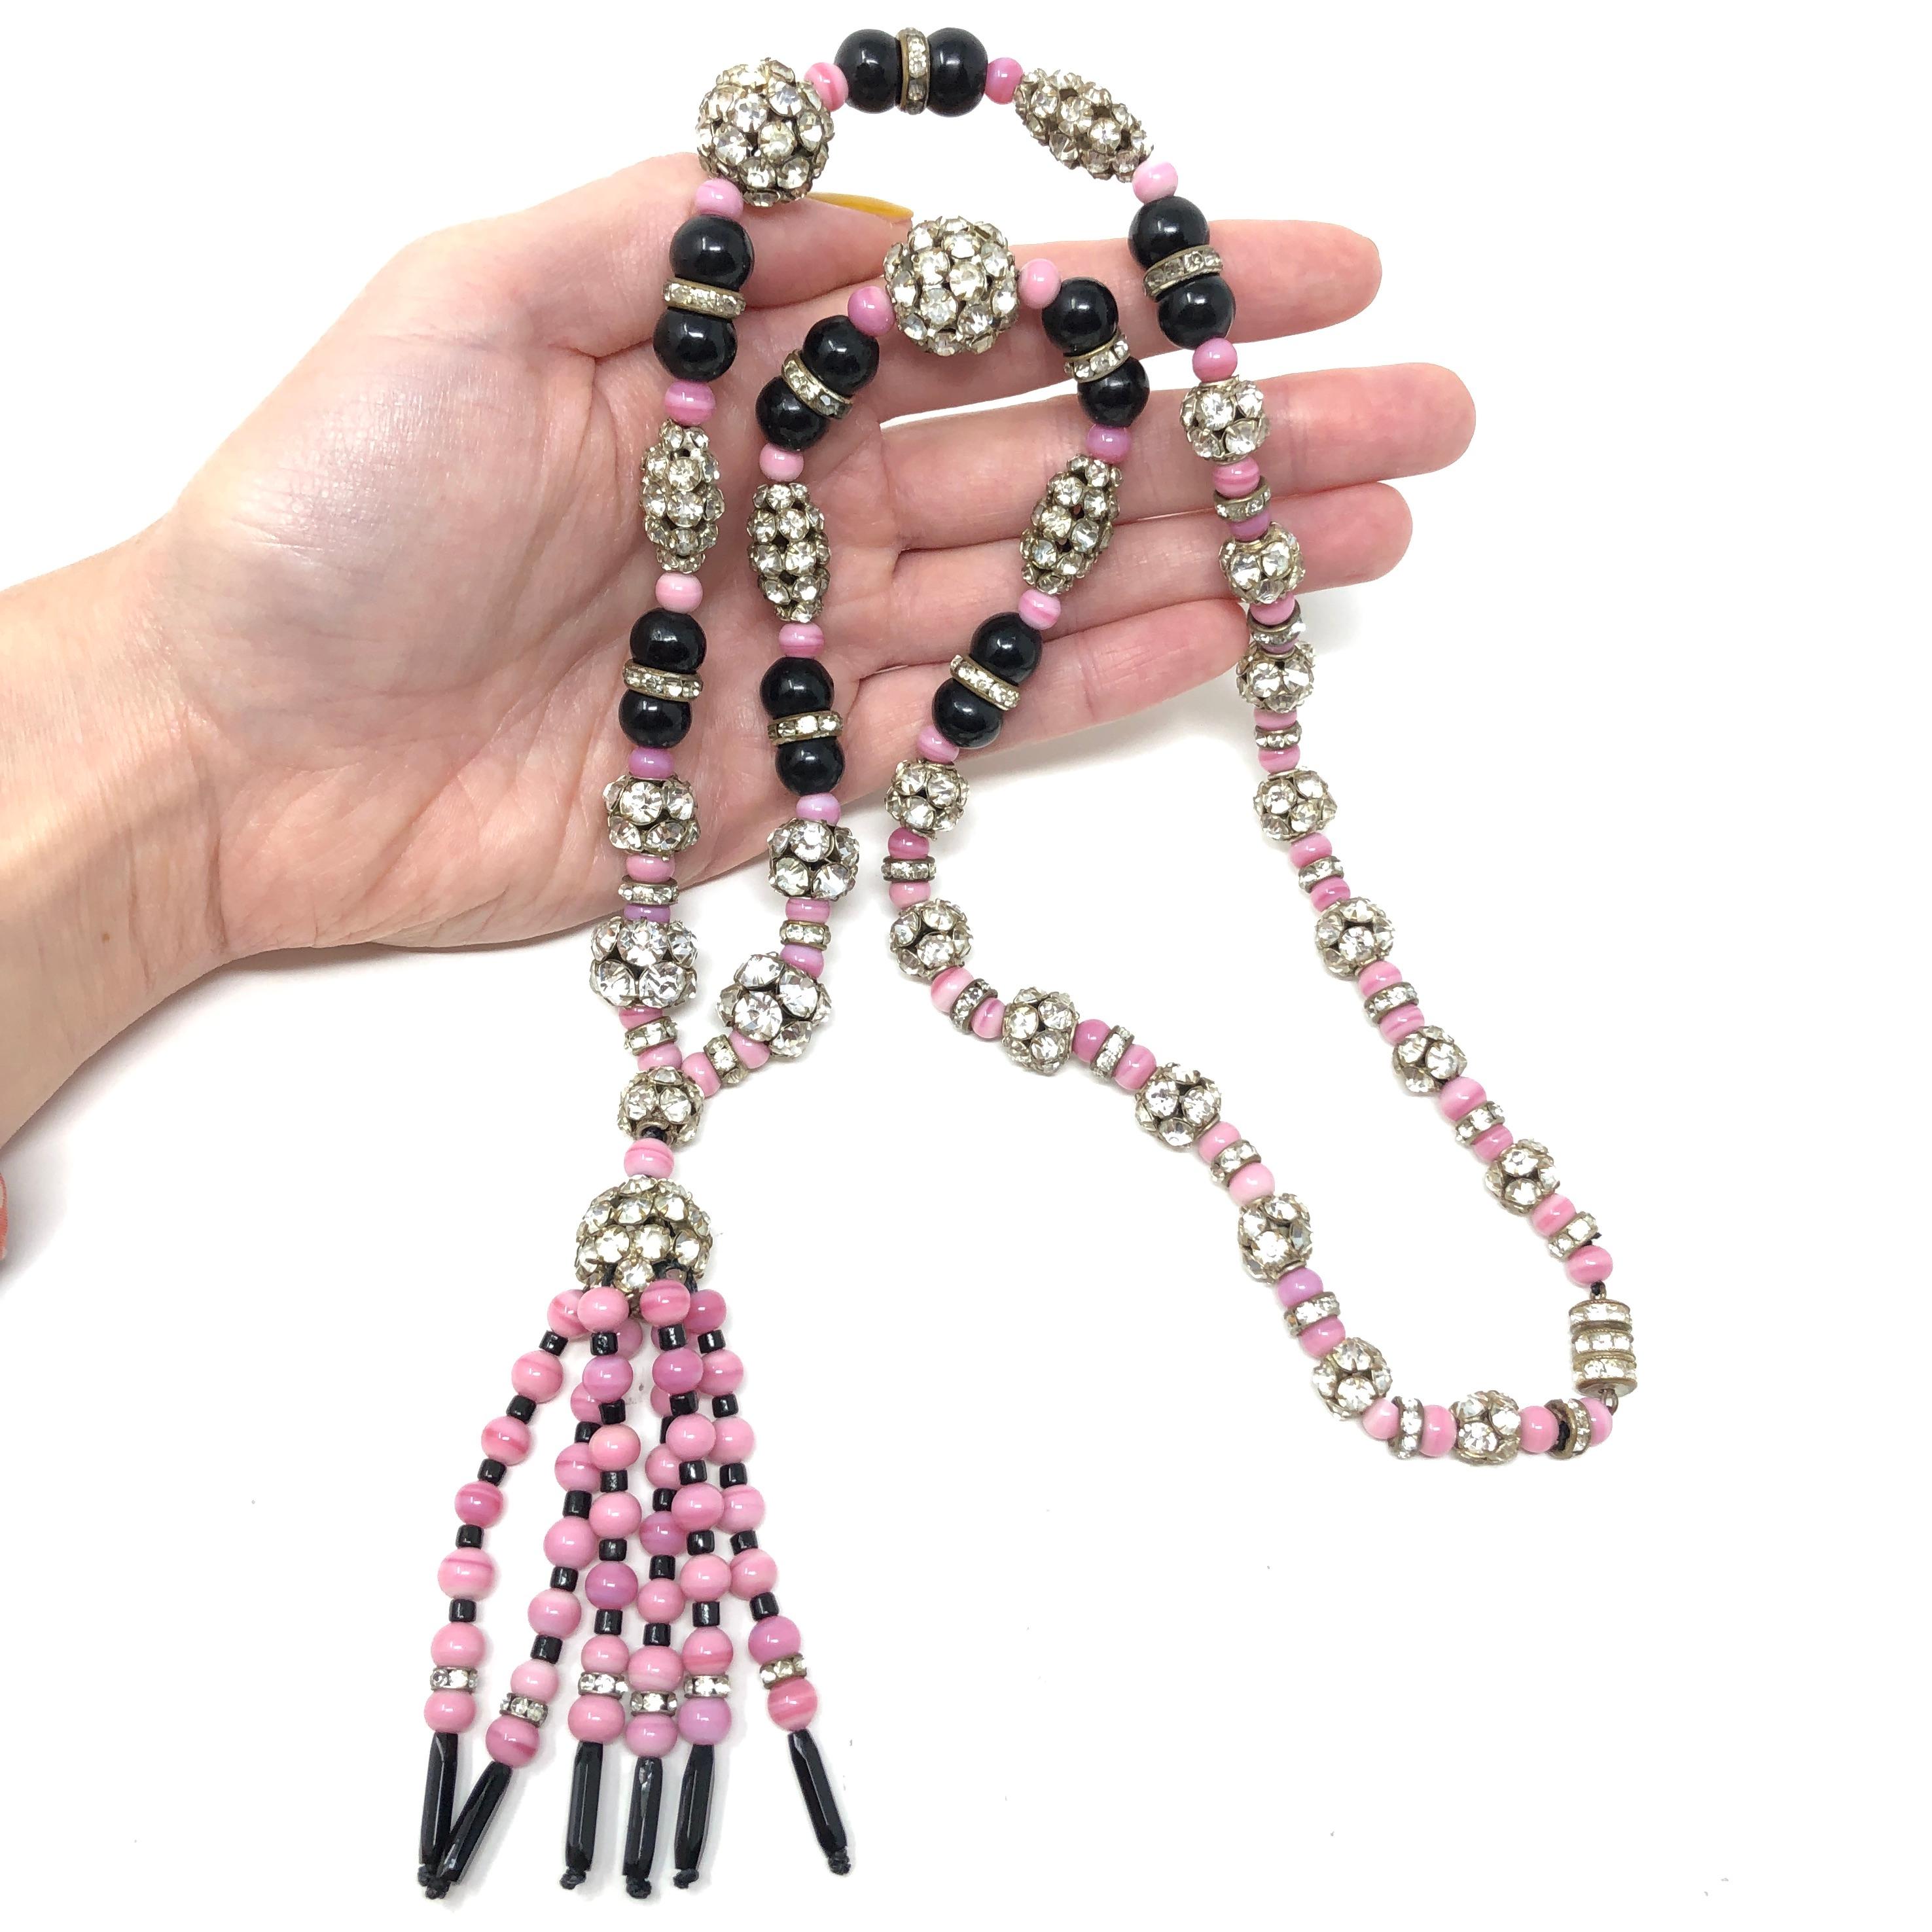 This rare and outstanding example of an Art Deco era flapper necklace was most likely created in France. 

Condition Report:
Excellent - The necklace has been professionally re-strung. 

The Details...
This necklace features round pink glass beads